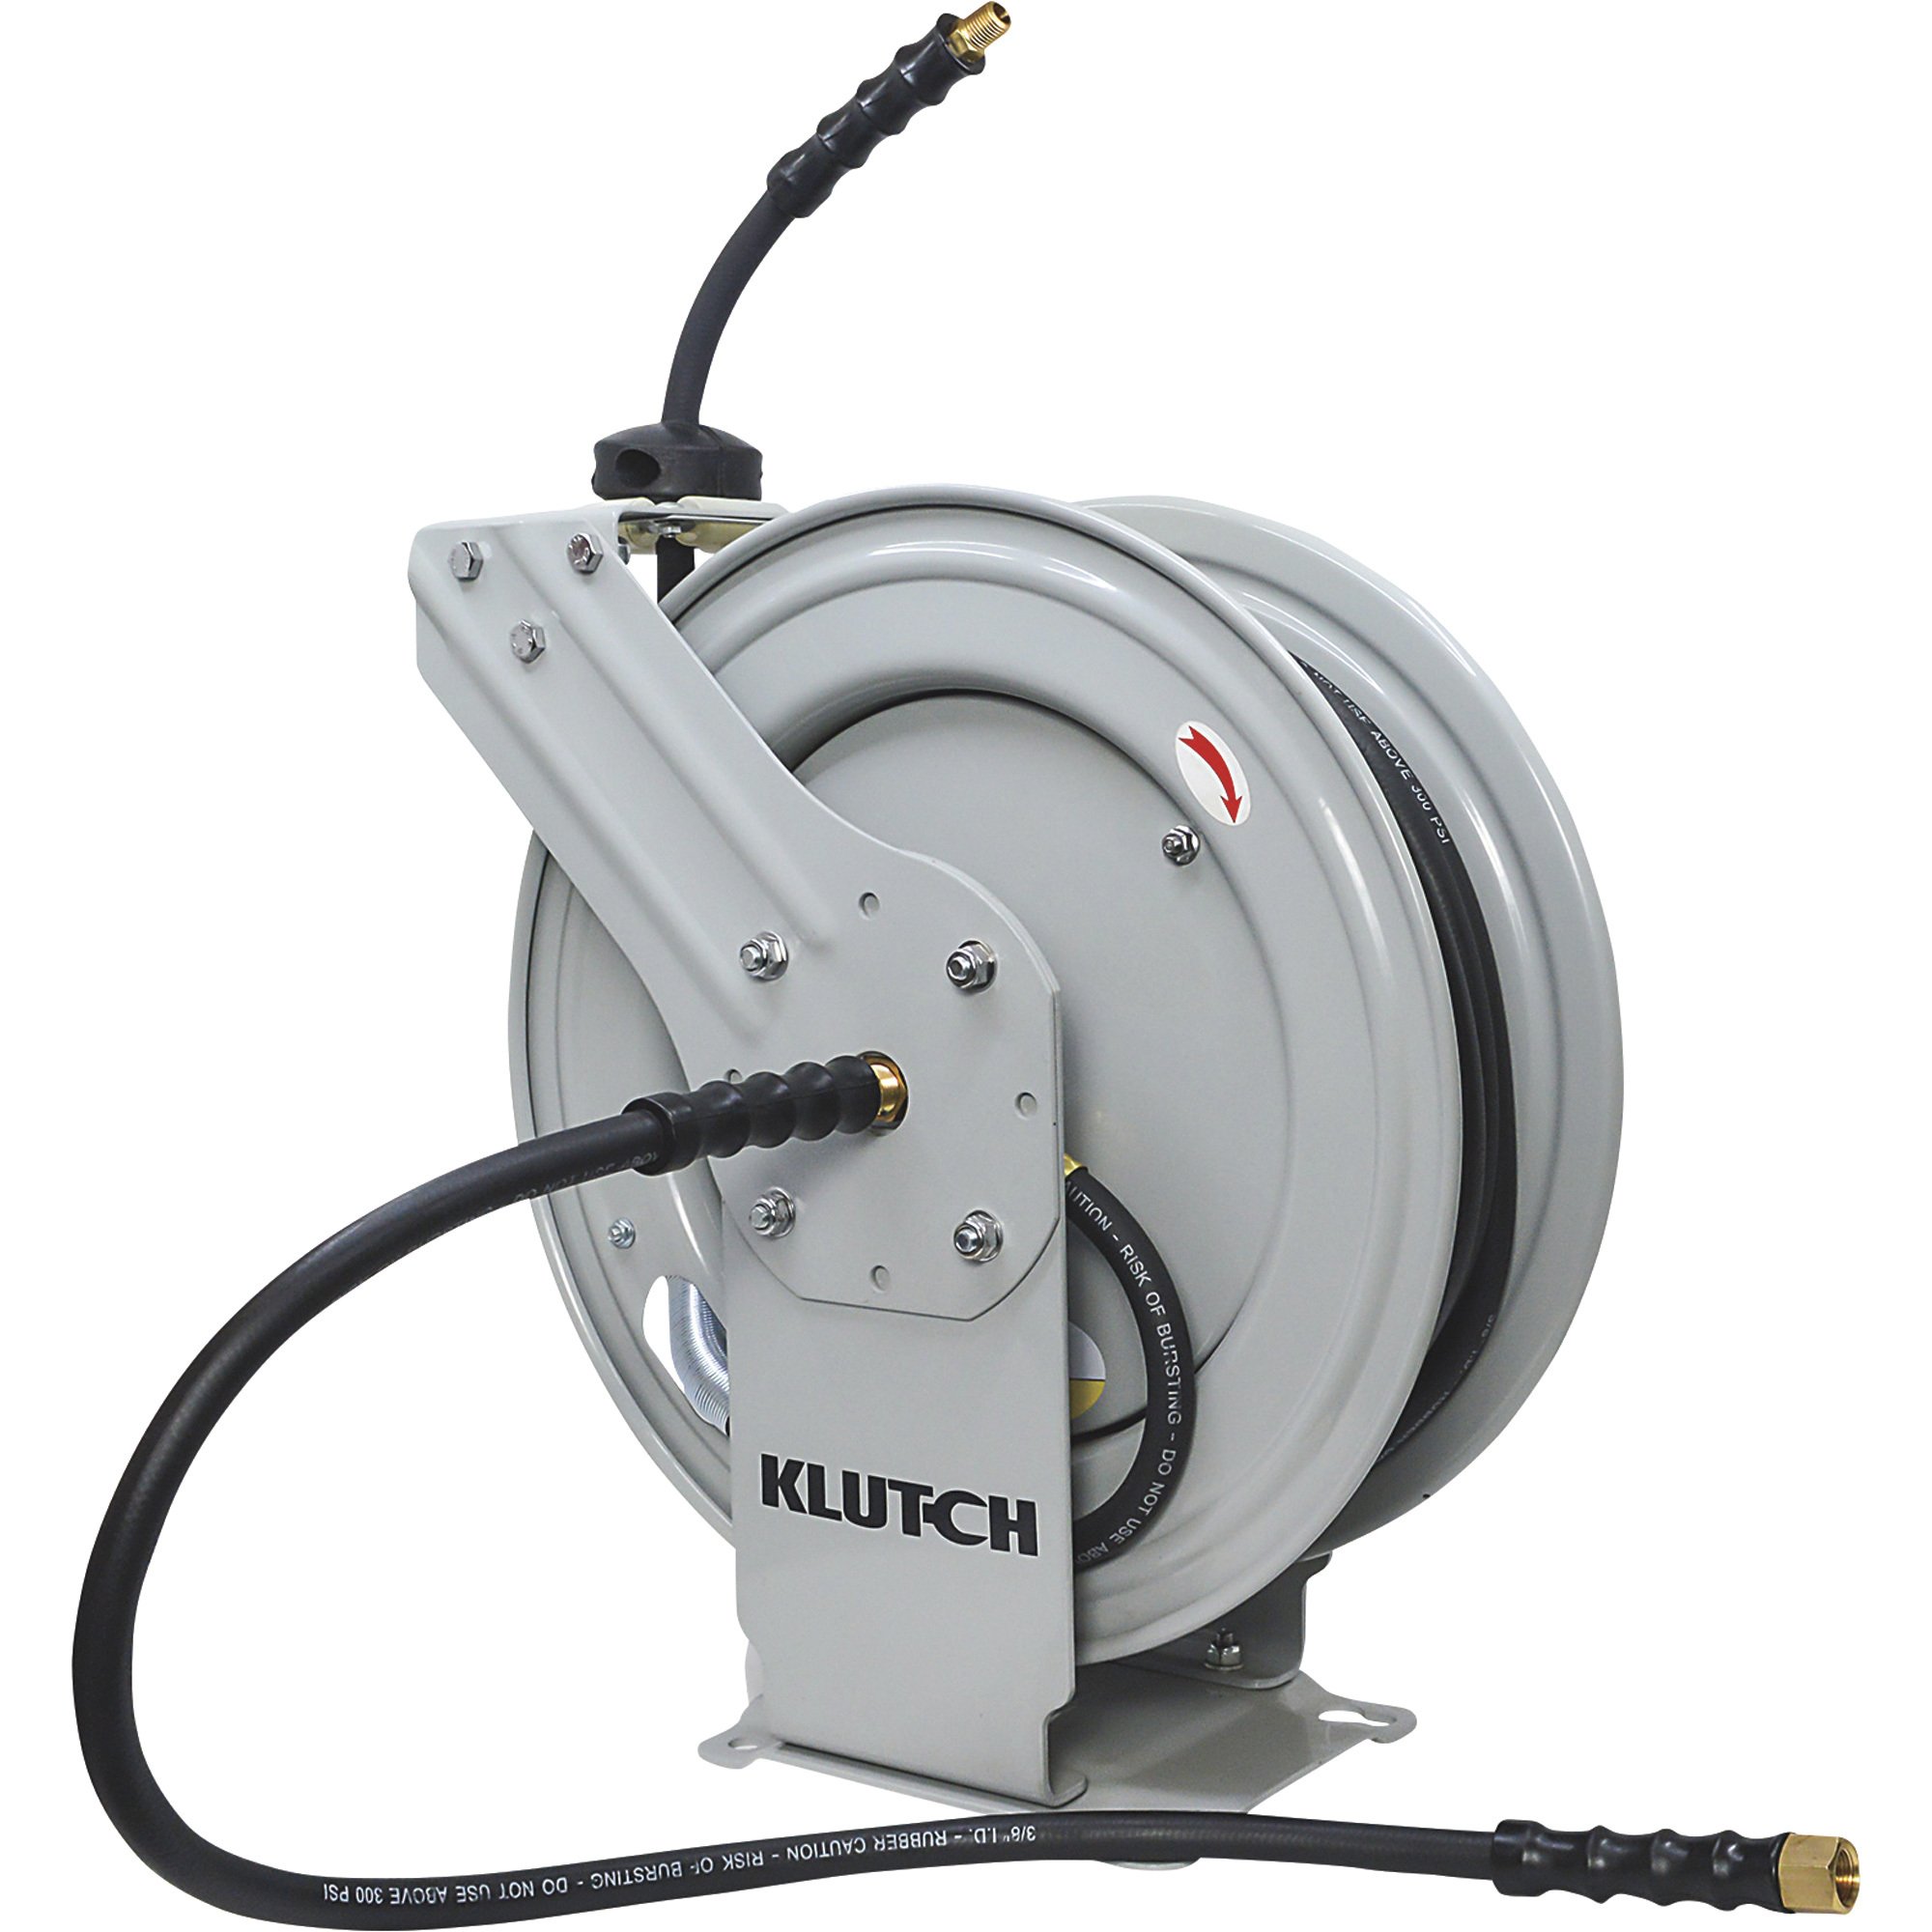 Klutch Auto-Rewind Air Hose Reel — With 3/8in. x 50ft. NBR Rubber